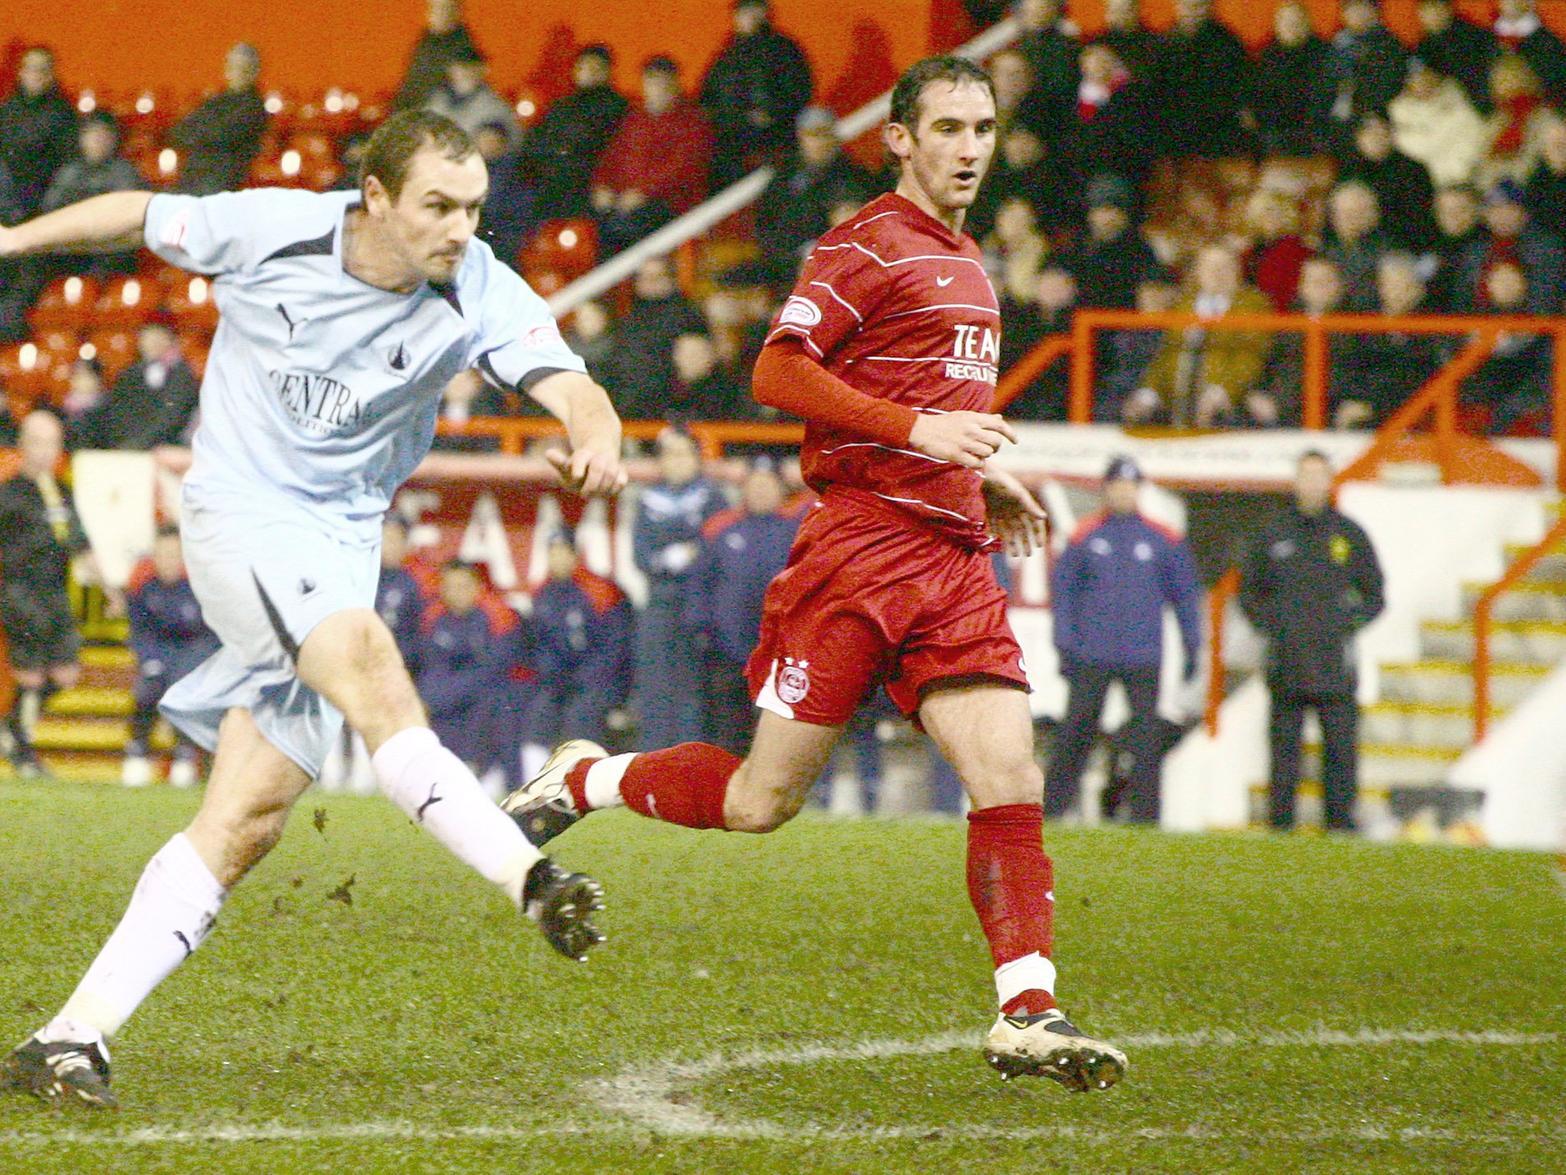 February 2, 2010. Colin Healy's second half strike warmed up a snowstorm and gave the Bairns their first league win at Pittodrie since 1958